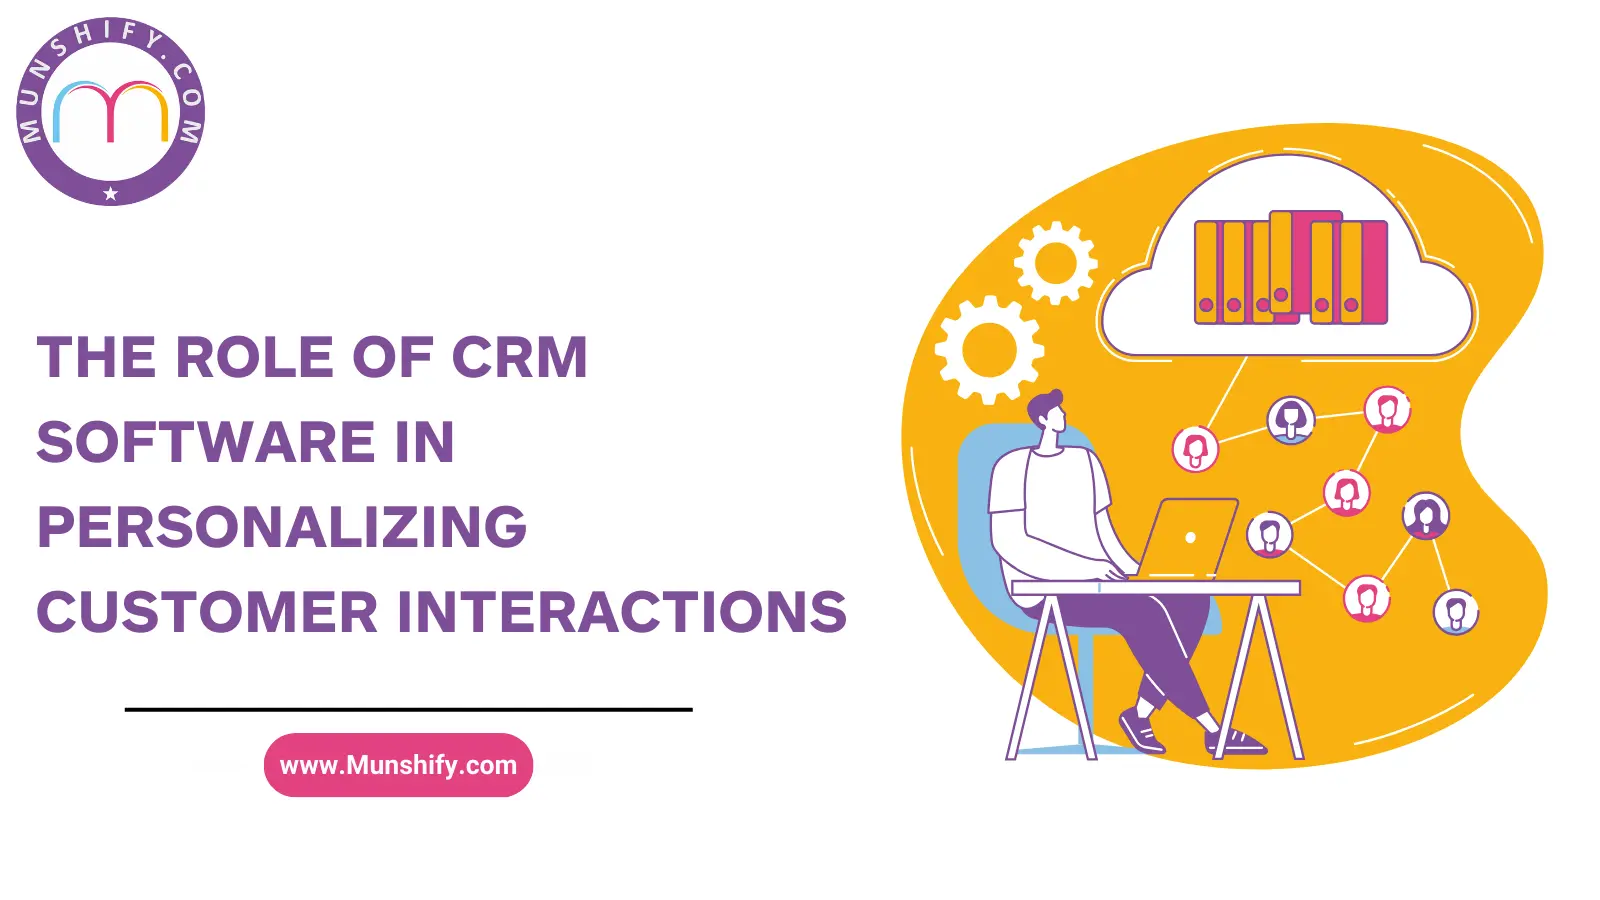 The Role of CRM Software in Personalizing Customer Interactions